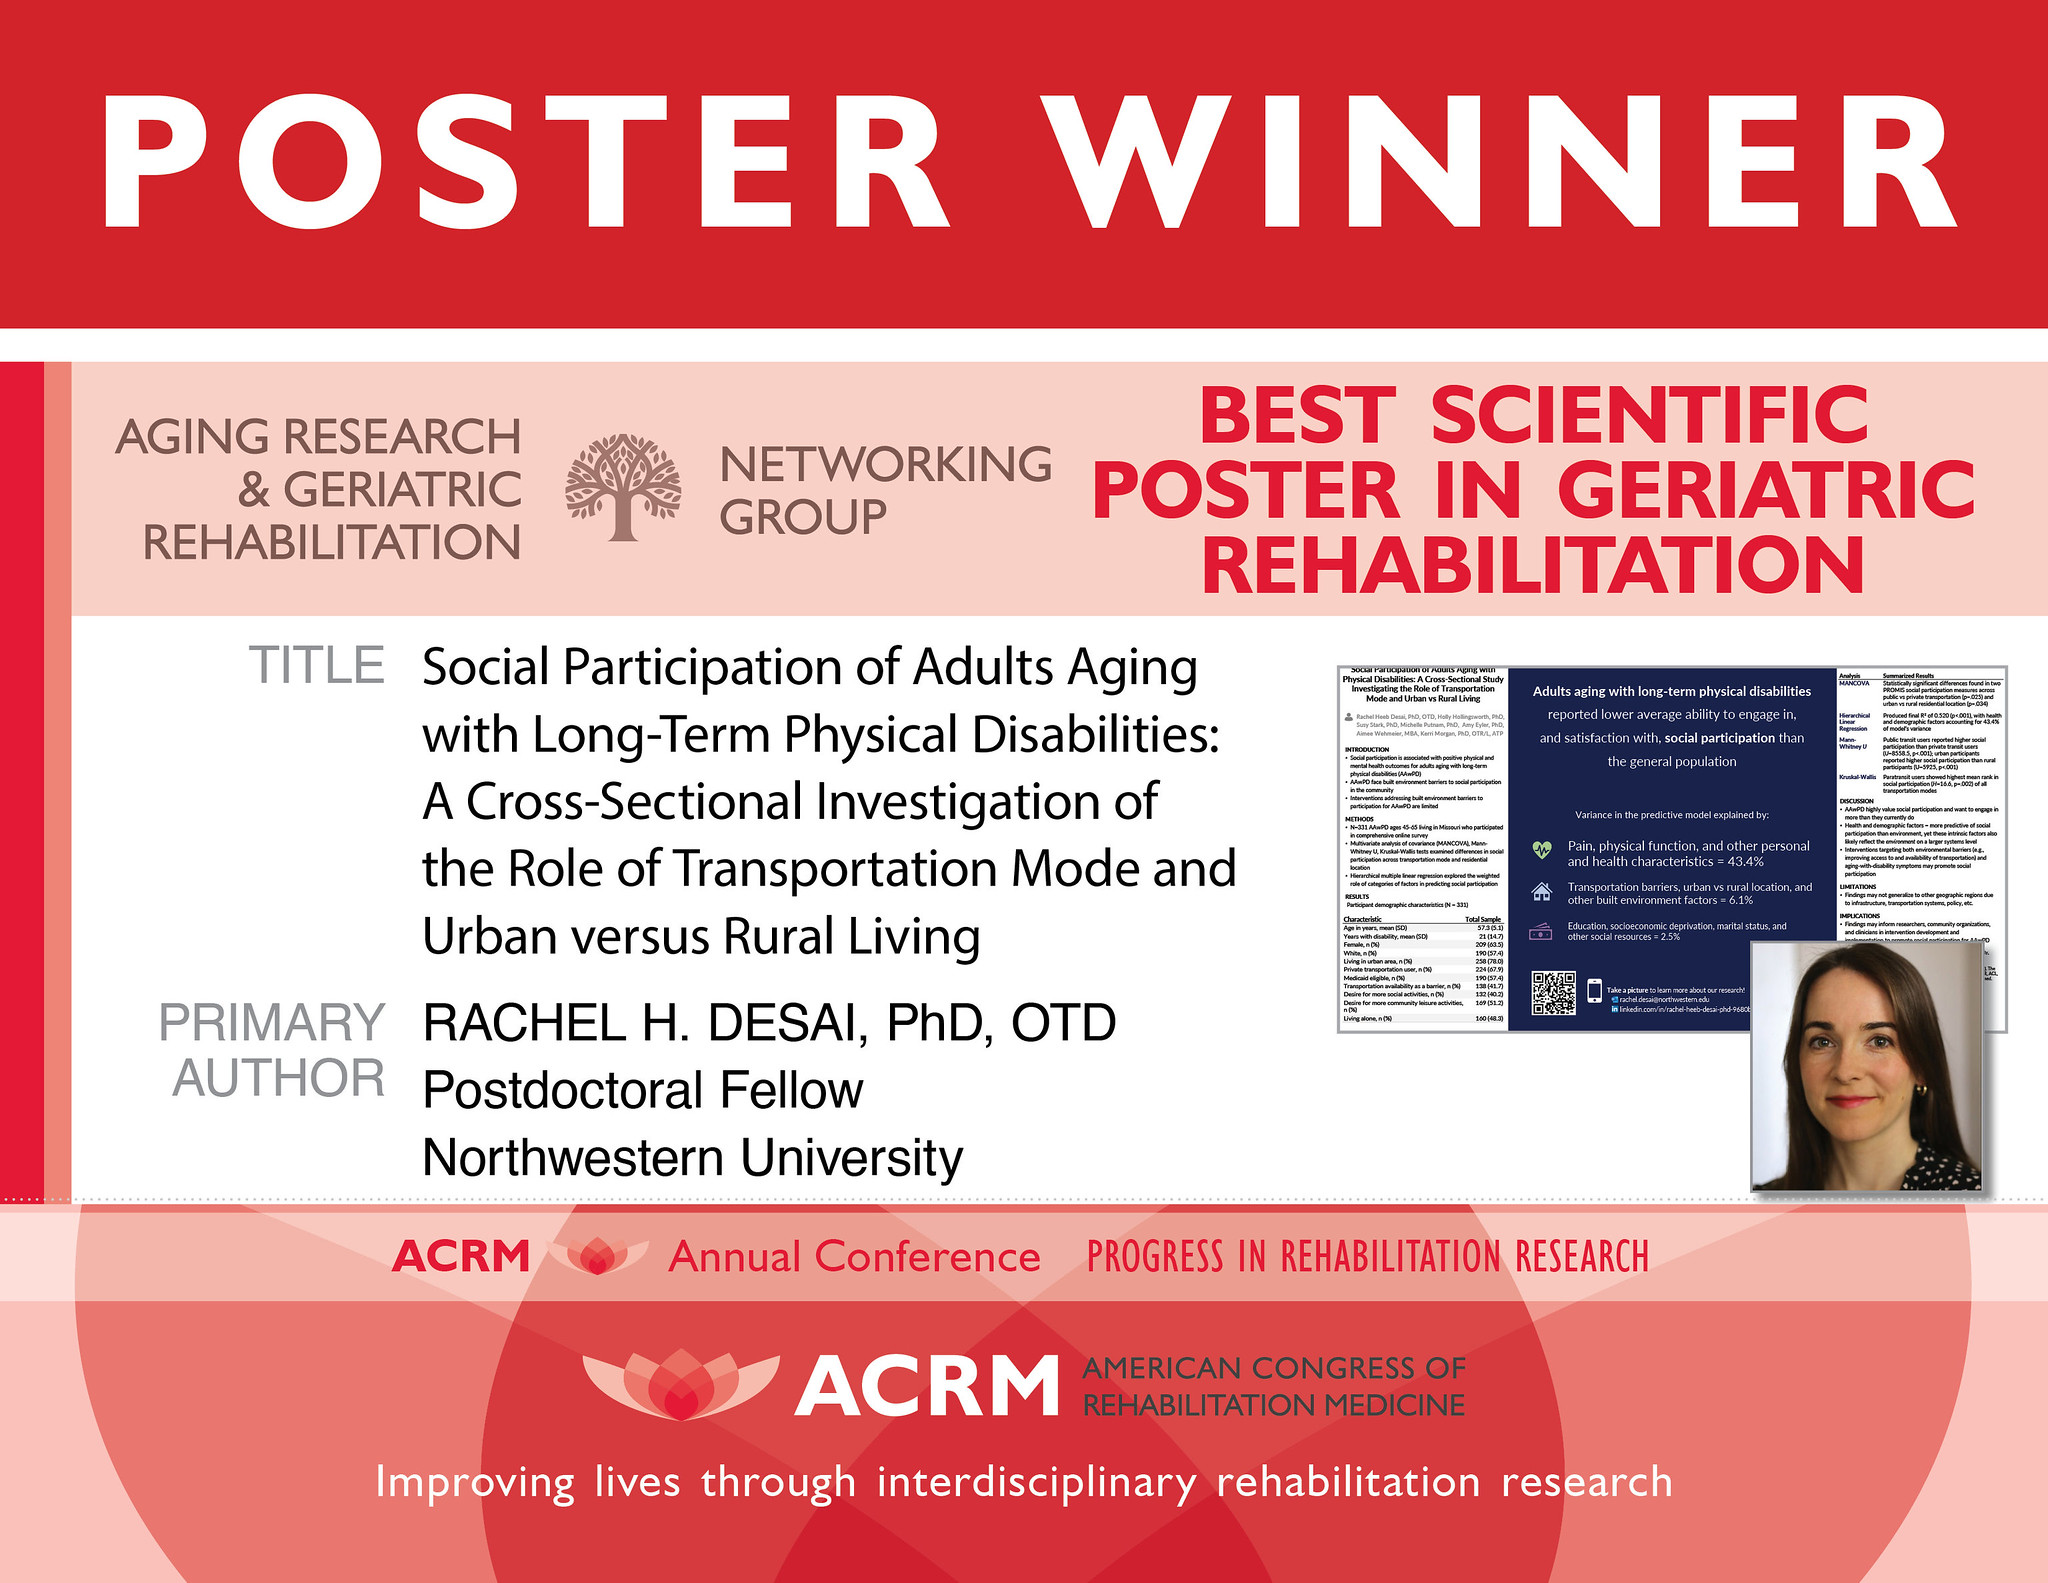 Best Scientific Poster in Aging Research and Geriatric Rehabilitation